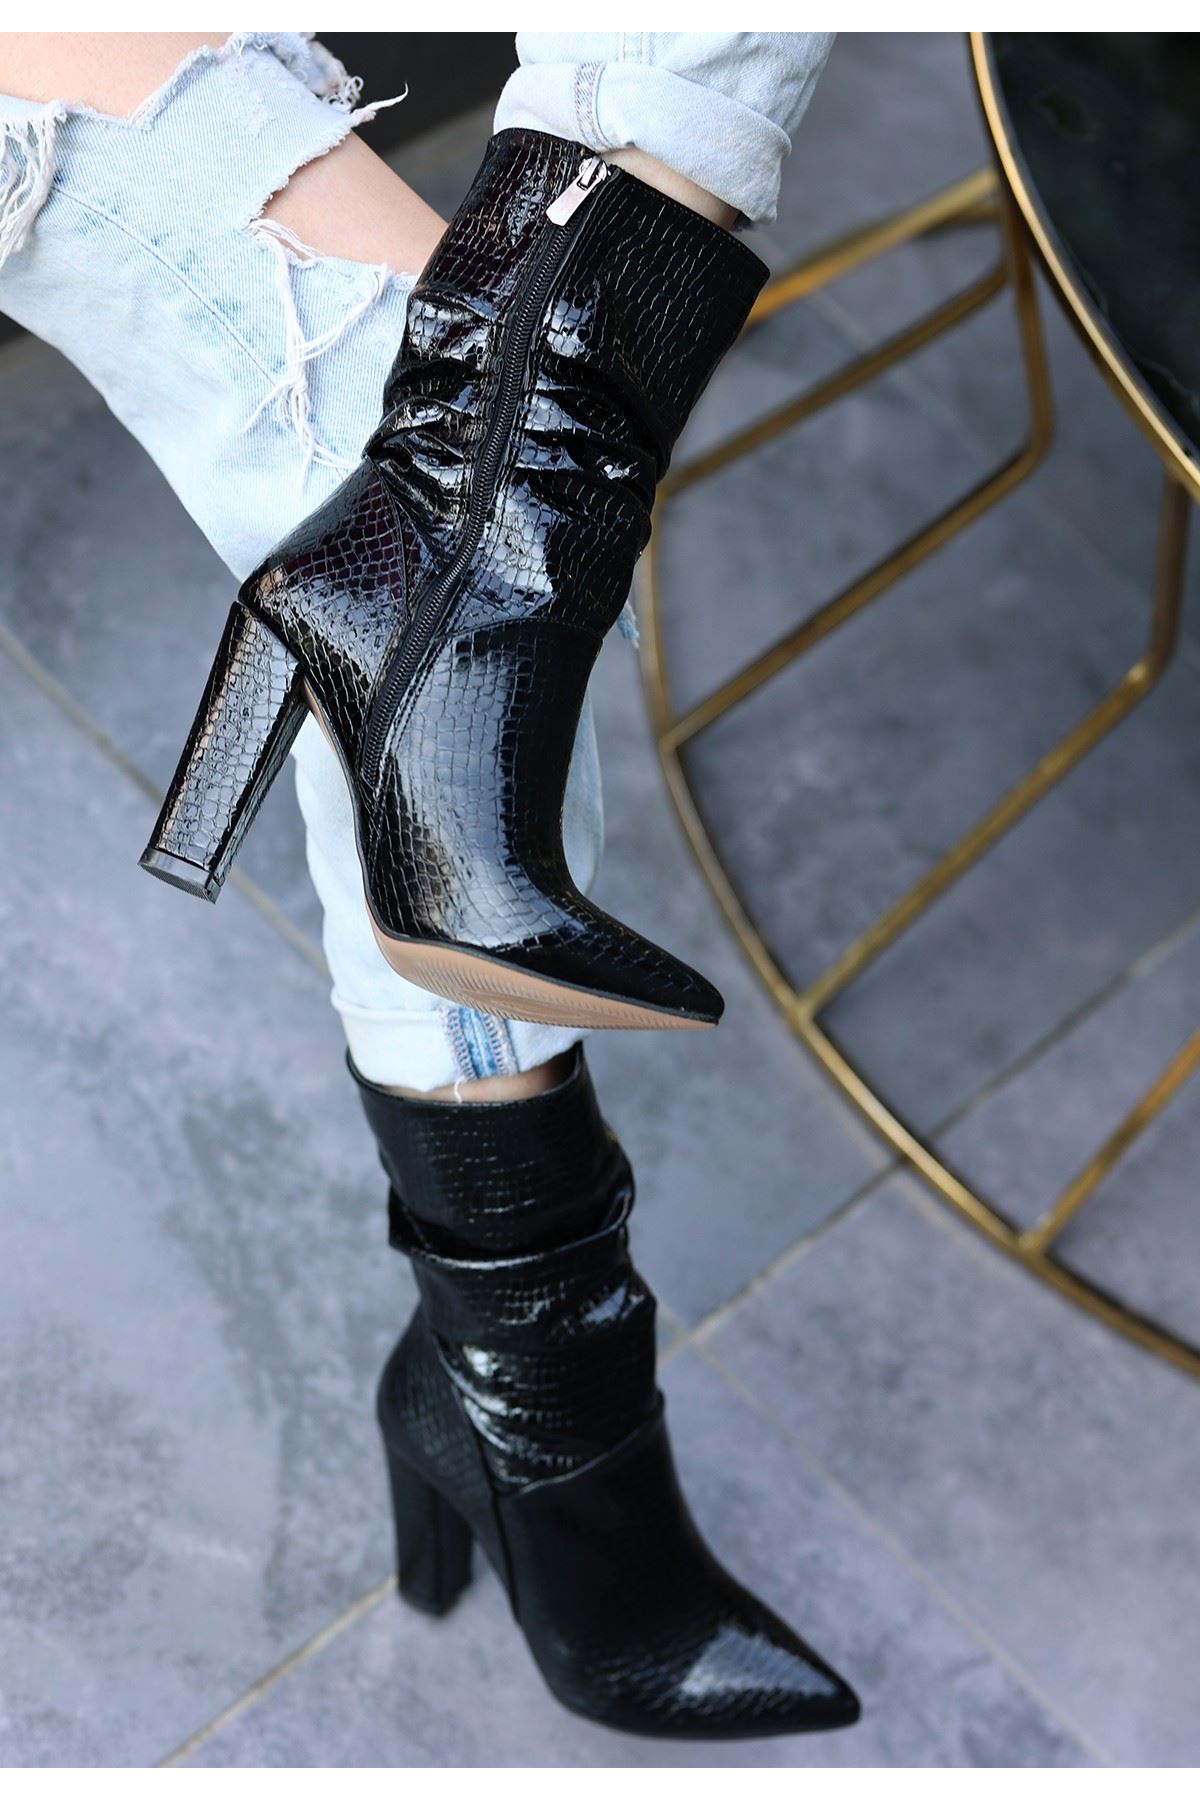 Black Patent Leather Patterned Heeled Boots